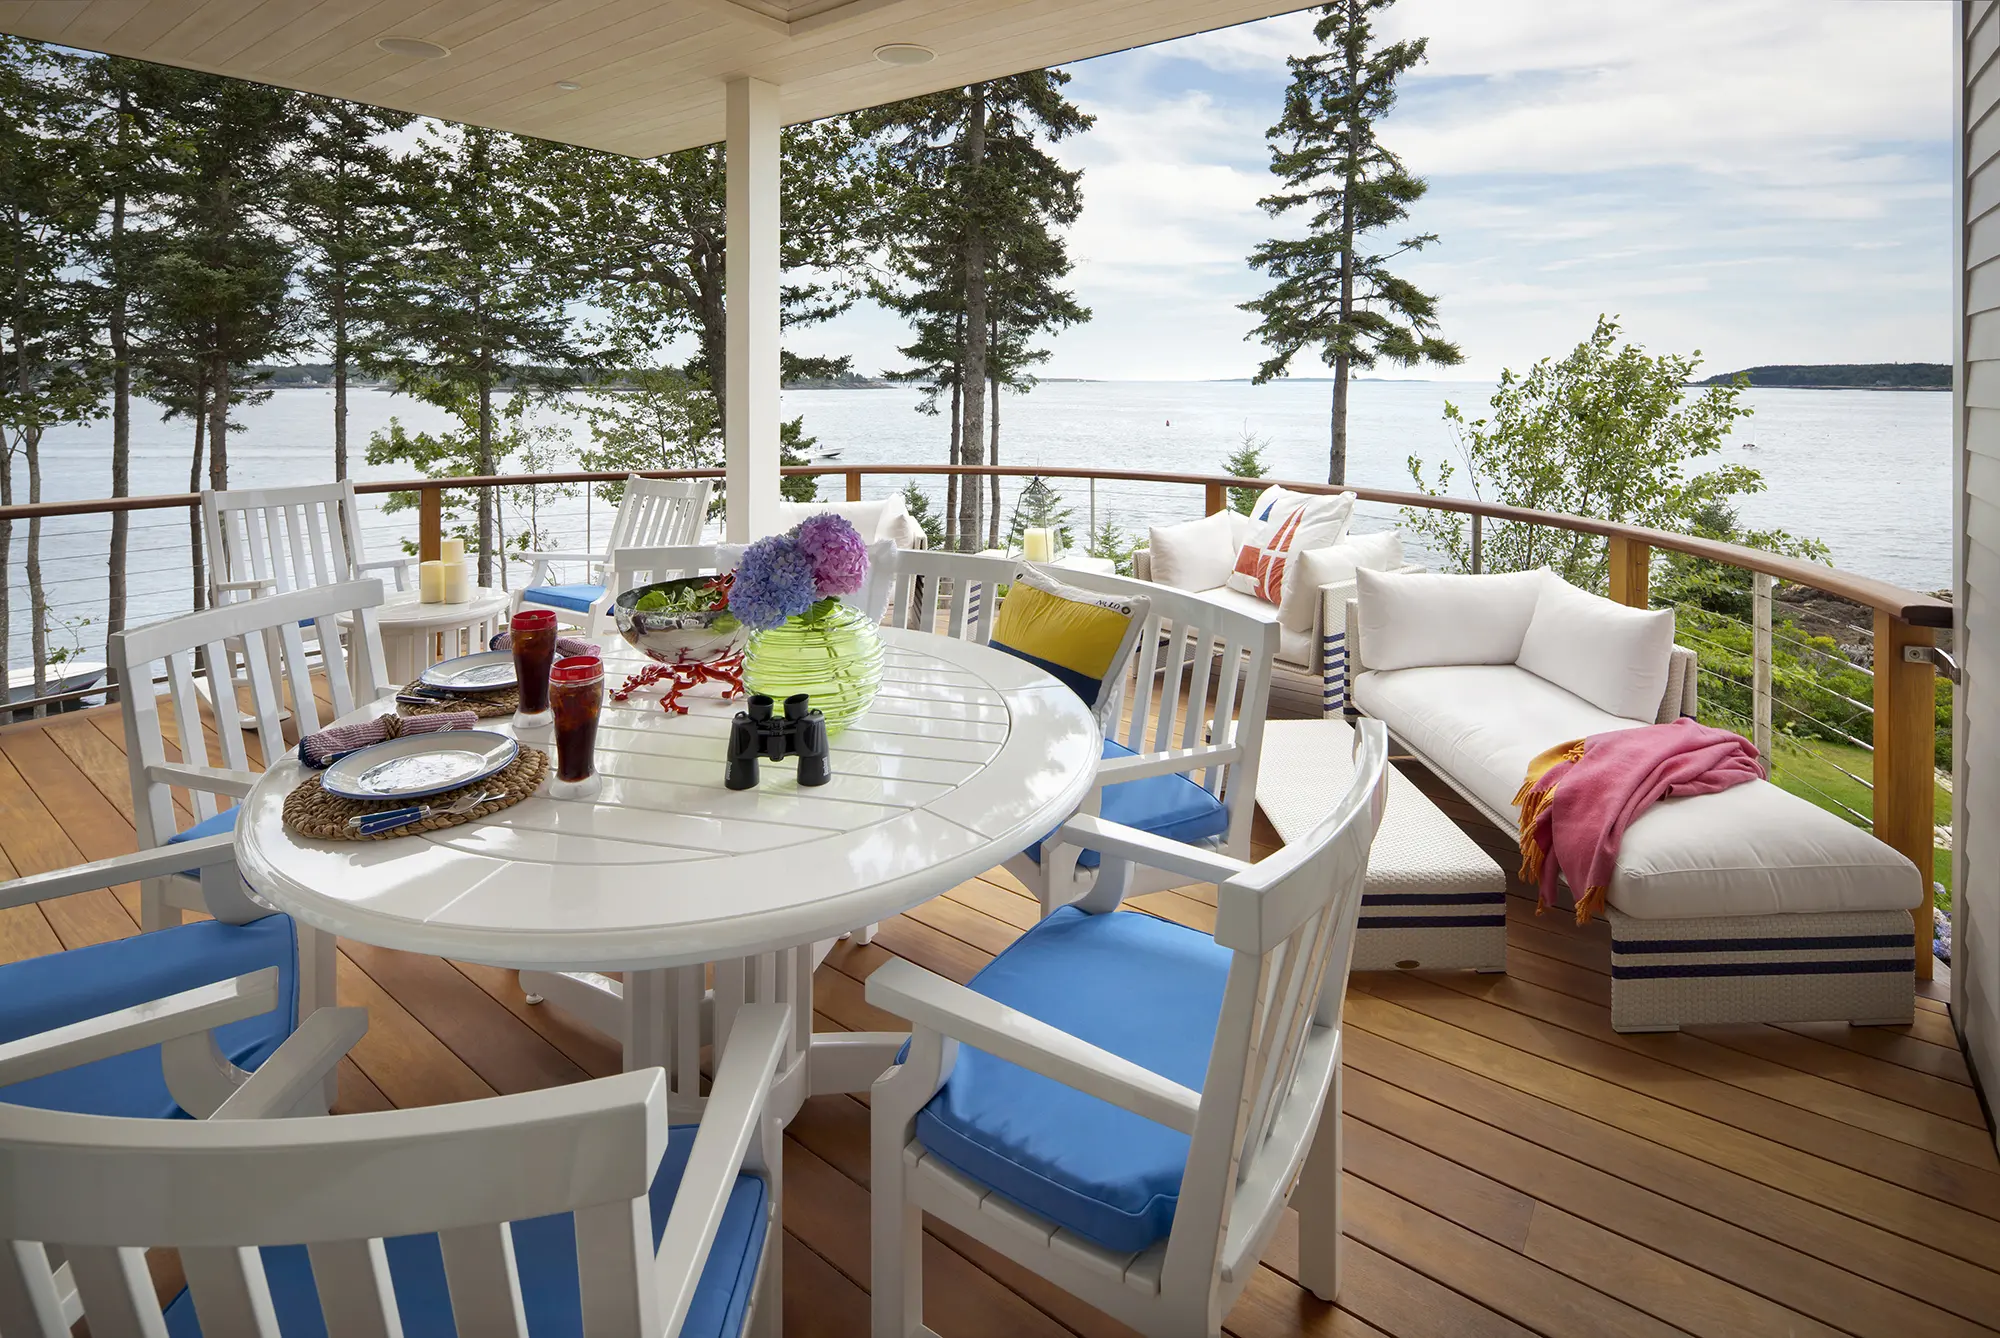 Covered deck with plenty of sitting space and coastal views